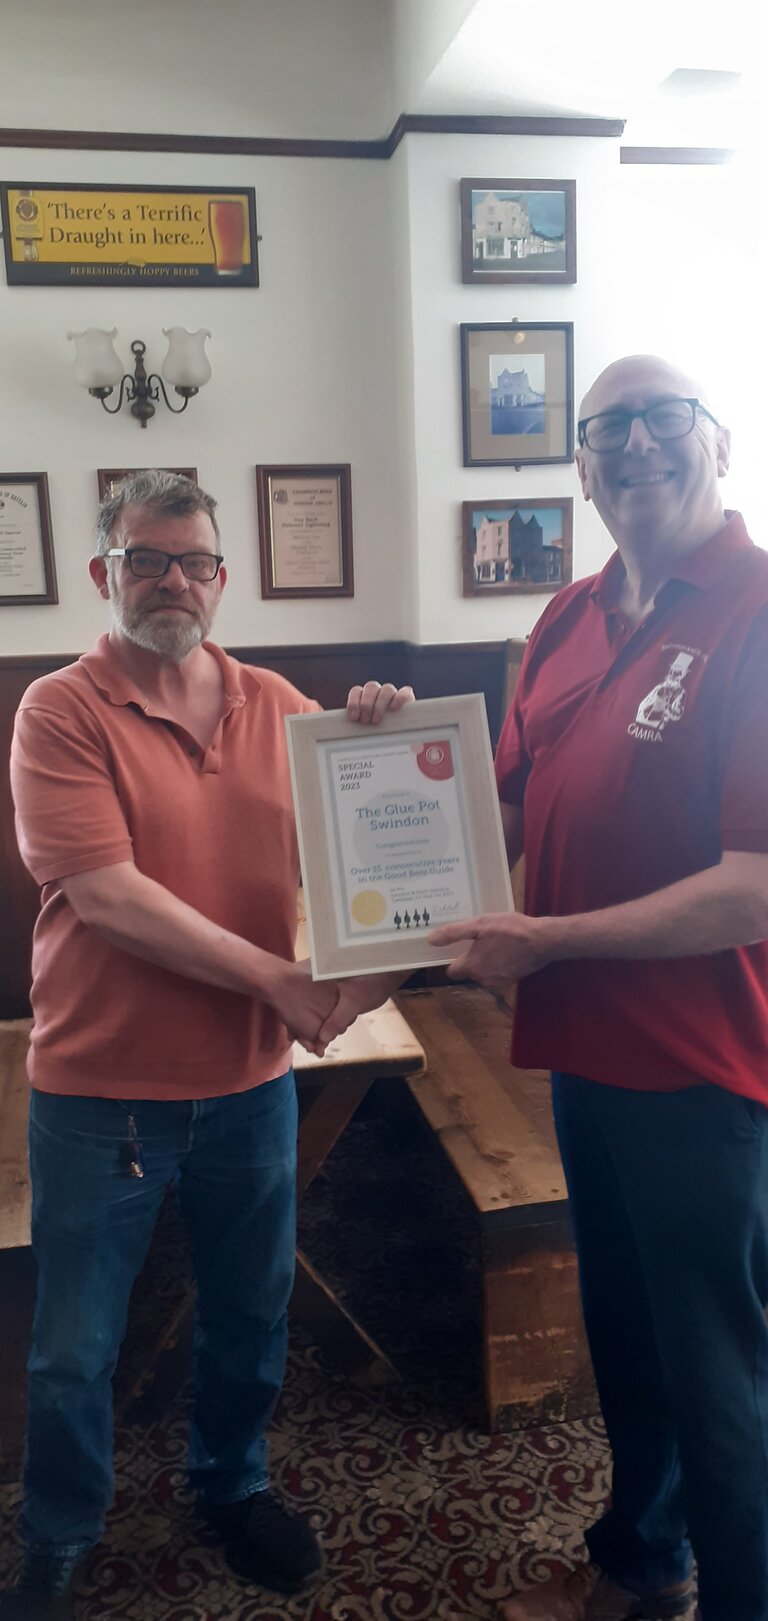 The Glue Pot was presented with a certificate to commemorate over 15 consecutive years of being in the Good Beer Guide. Quite an achievement!